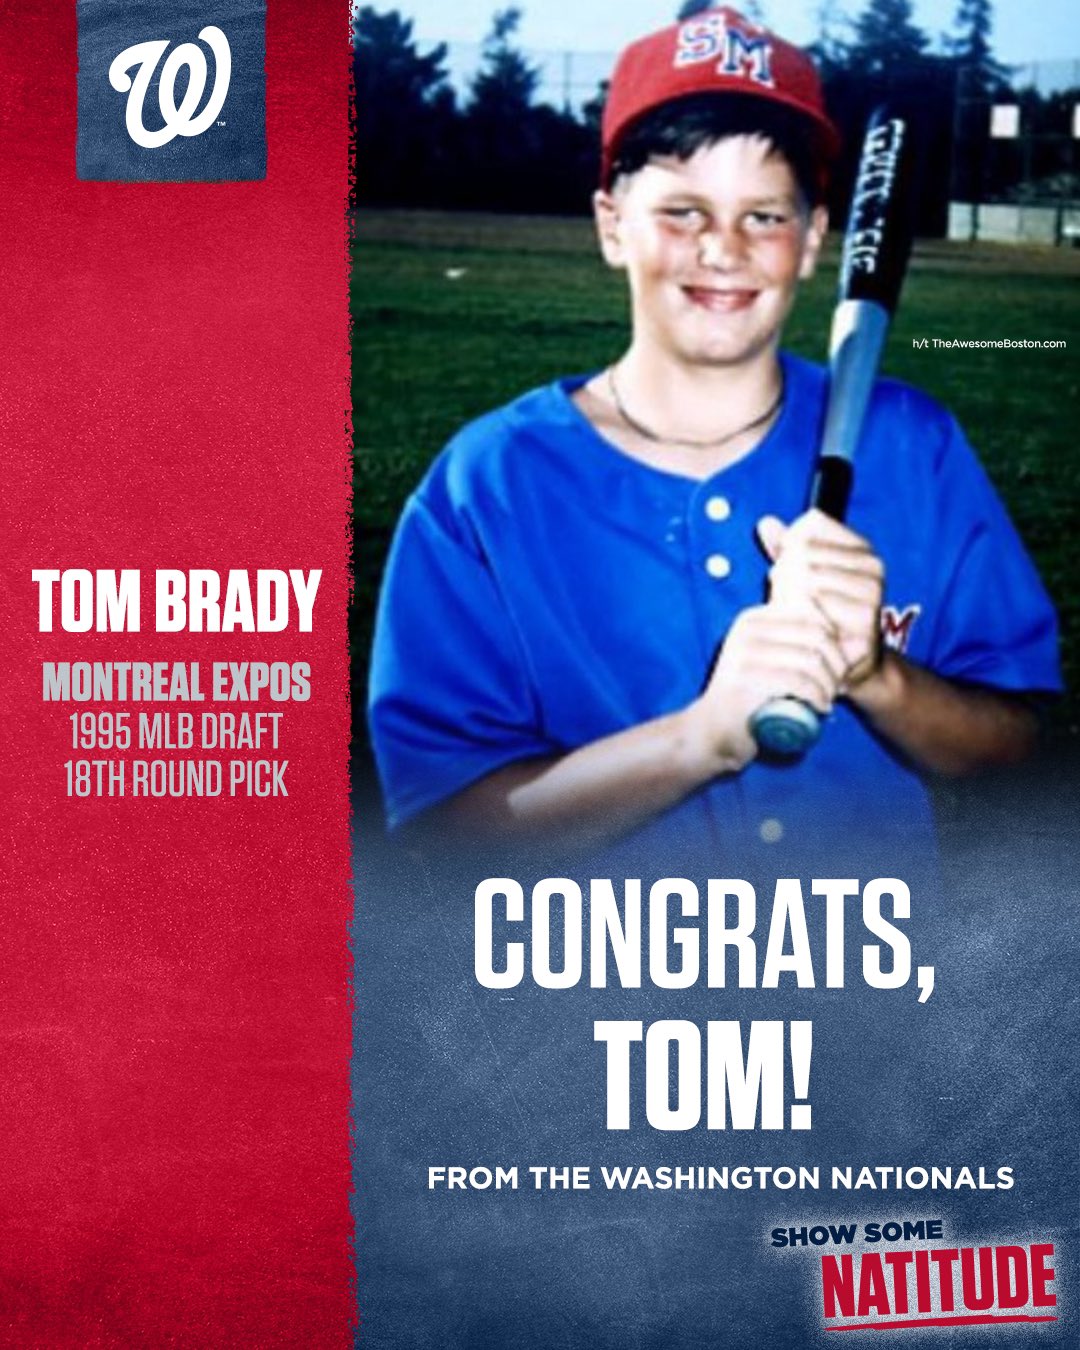 Washington Nationals on X: 'Congrats to former Expos draft pick @TomBrady  on a great career!  / X